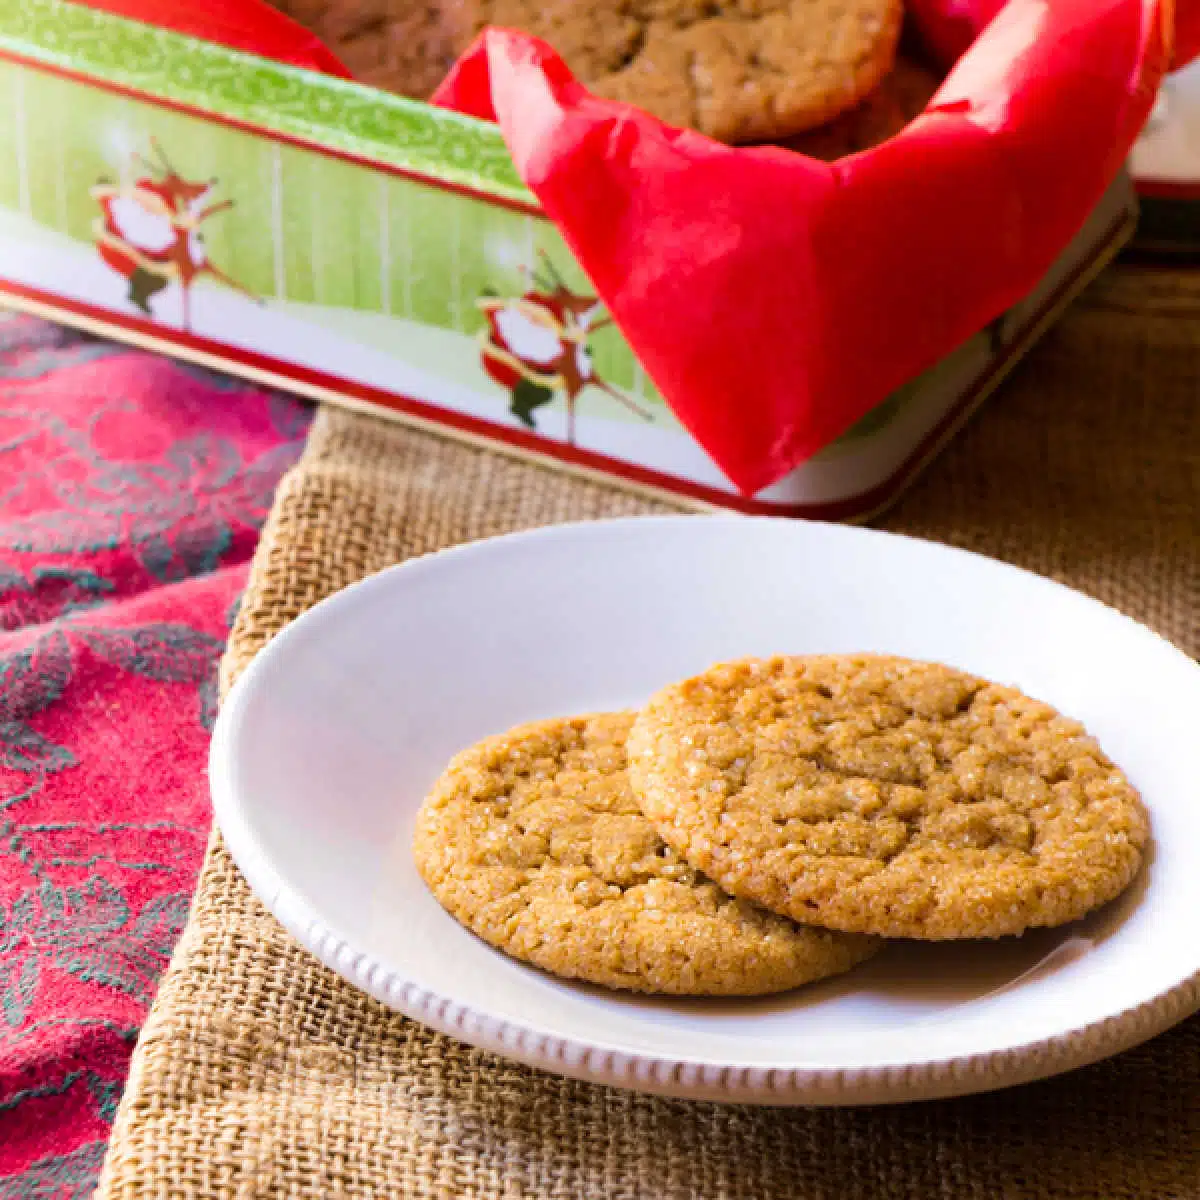 Two ginger molasses cookies on a plate with a box of cookies in the background.